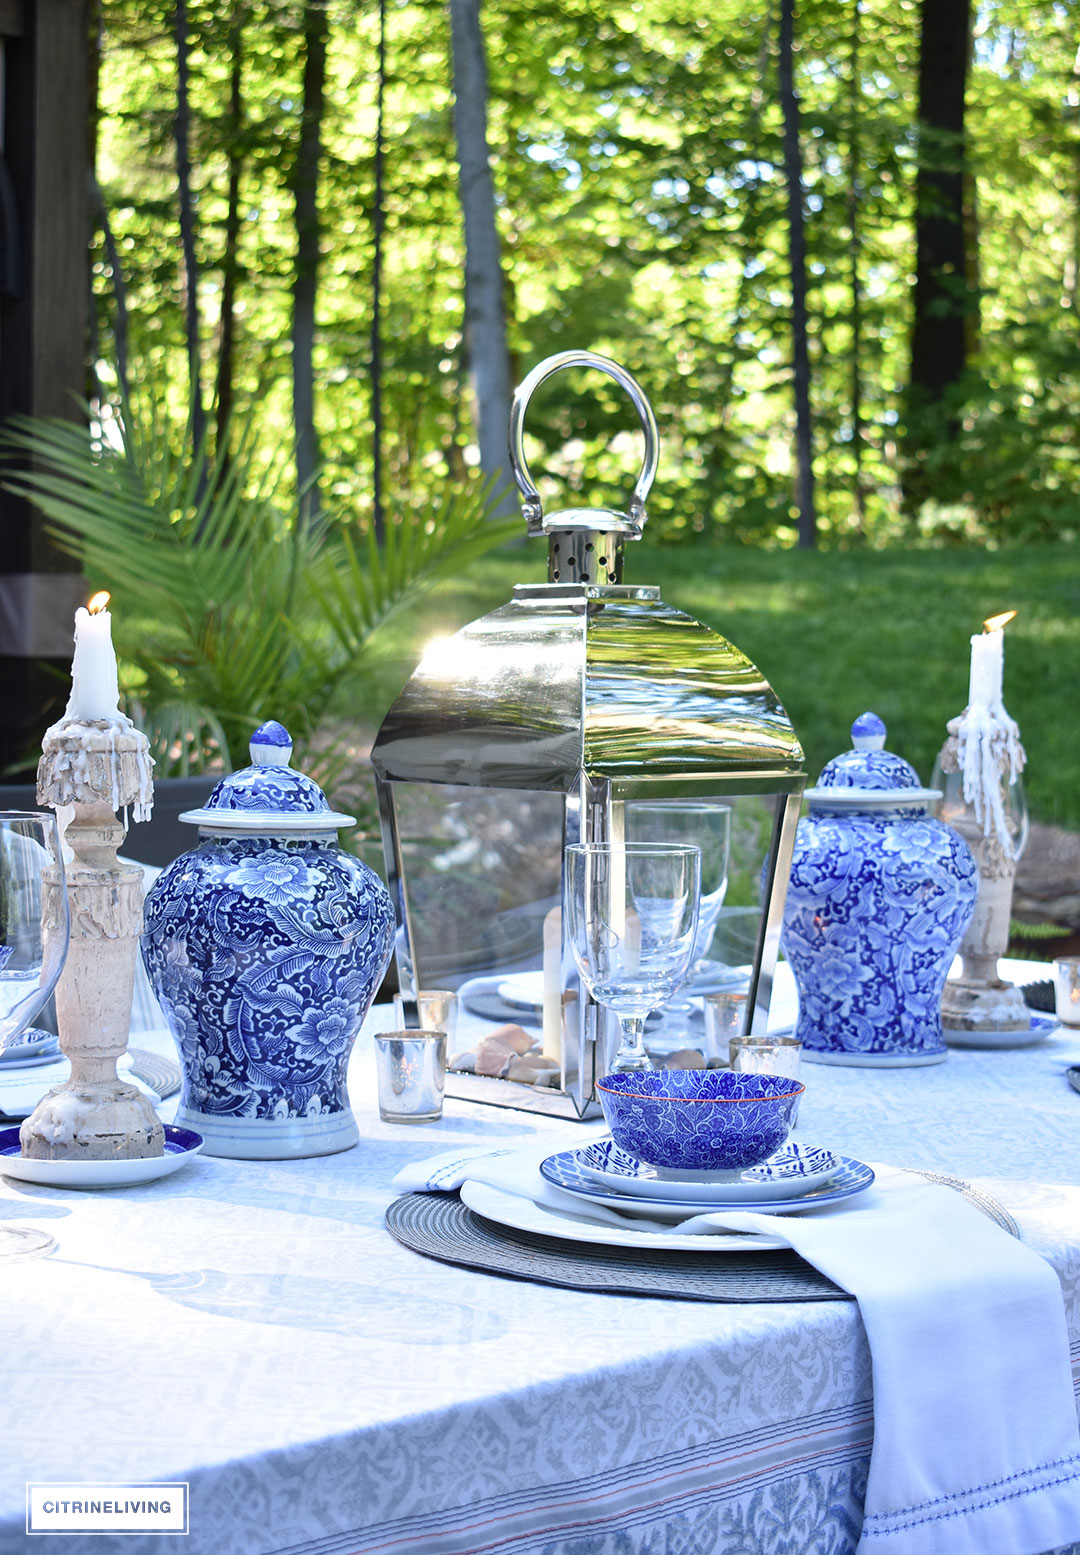 Beautiful outdoor tablescape with a silver lantern flanked by blue and white ginger jars